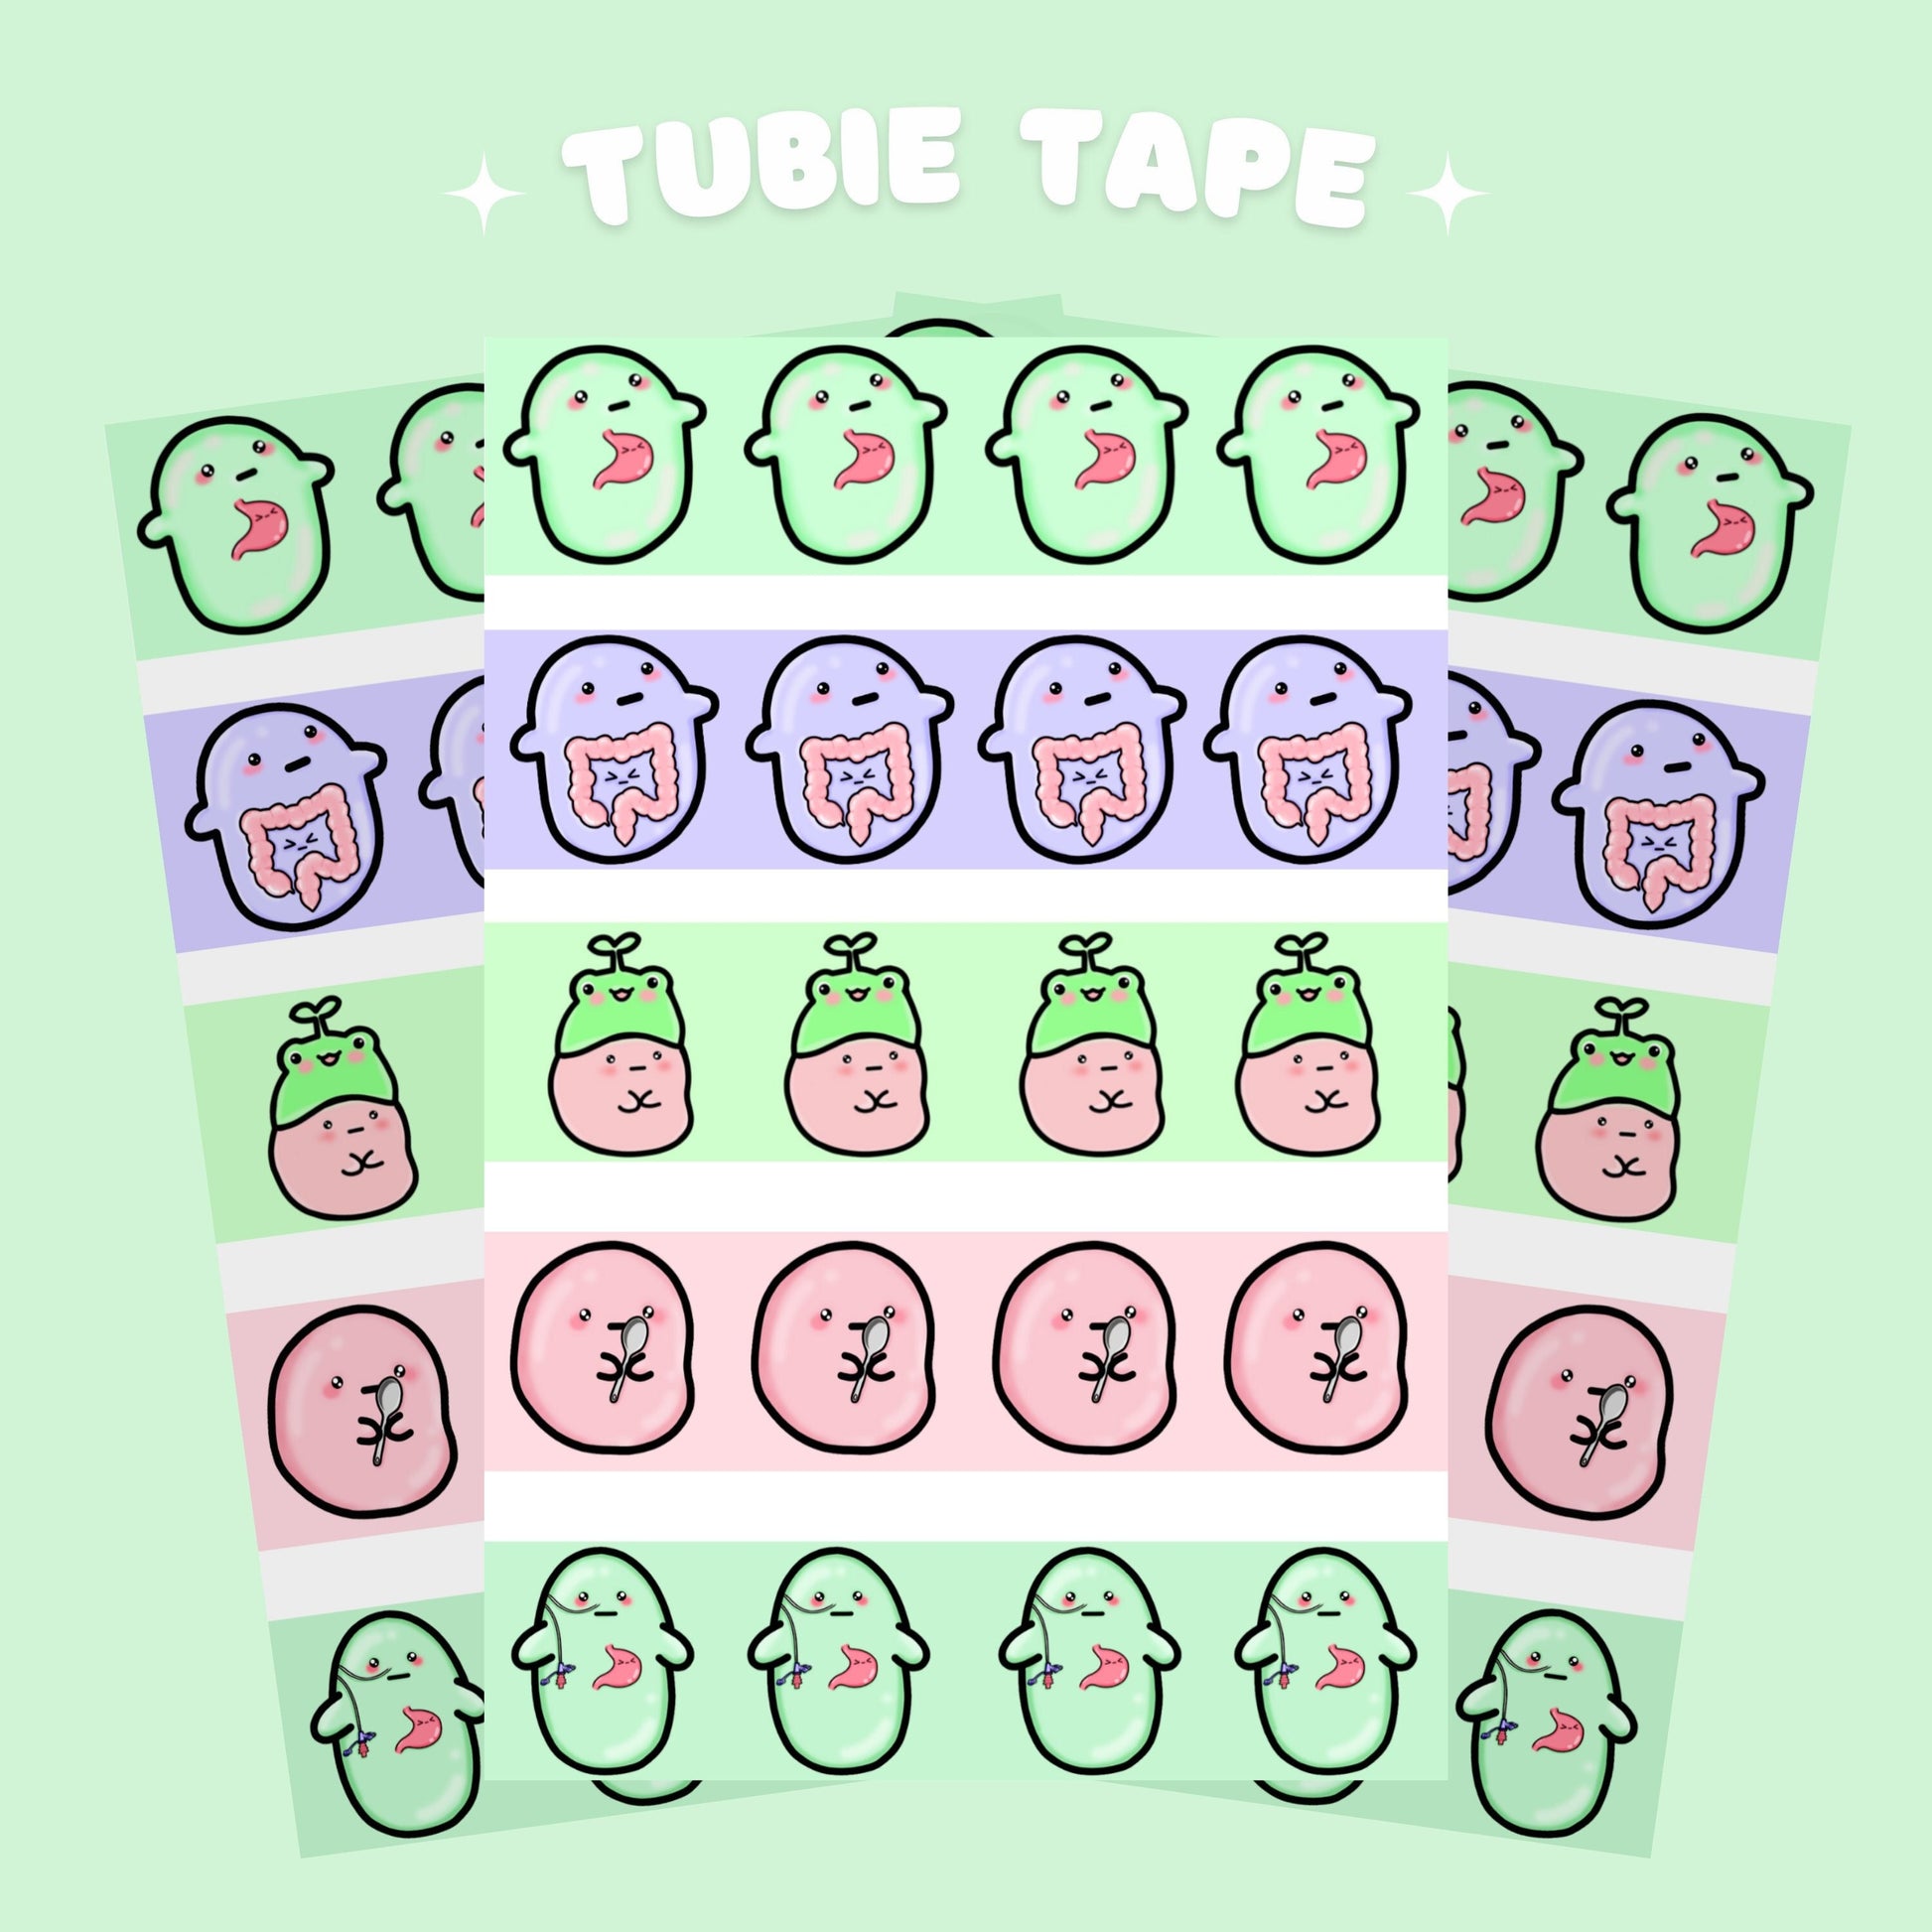 Mixed bean design tubie tape- ng/nj hypafix tape sheet with 5 strips, perfect for feeding tubes, oxygen cannulas, port dressings